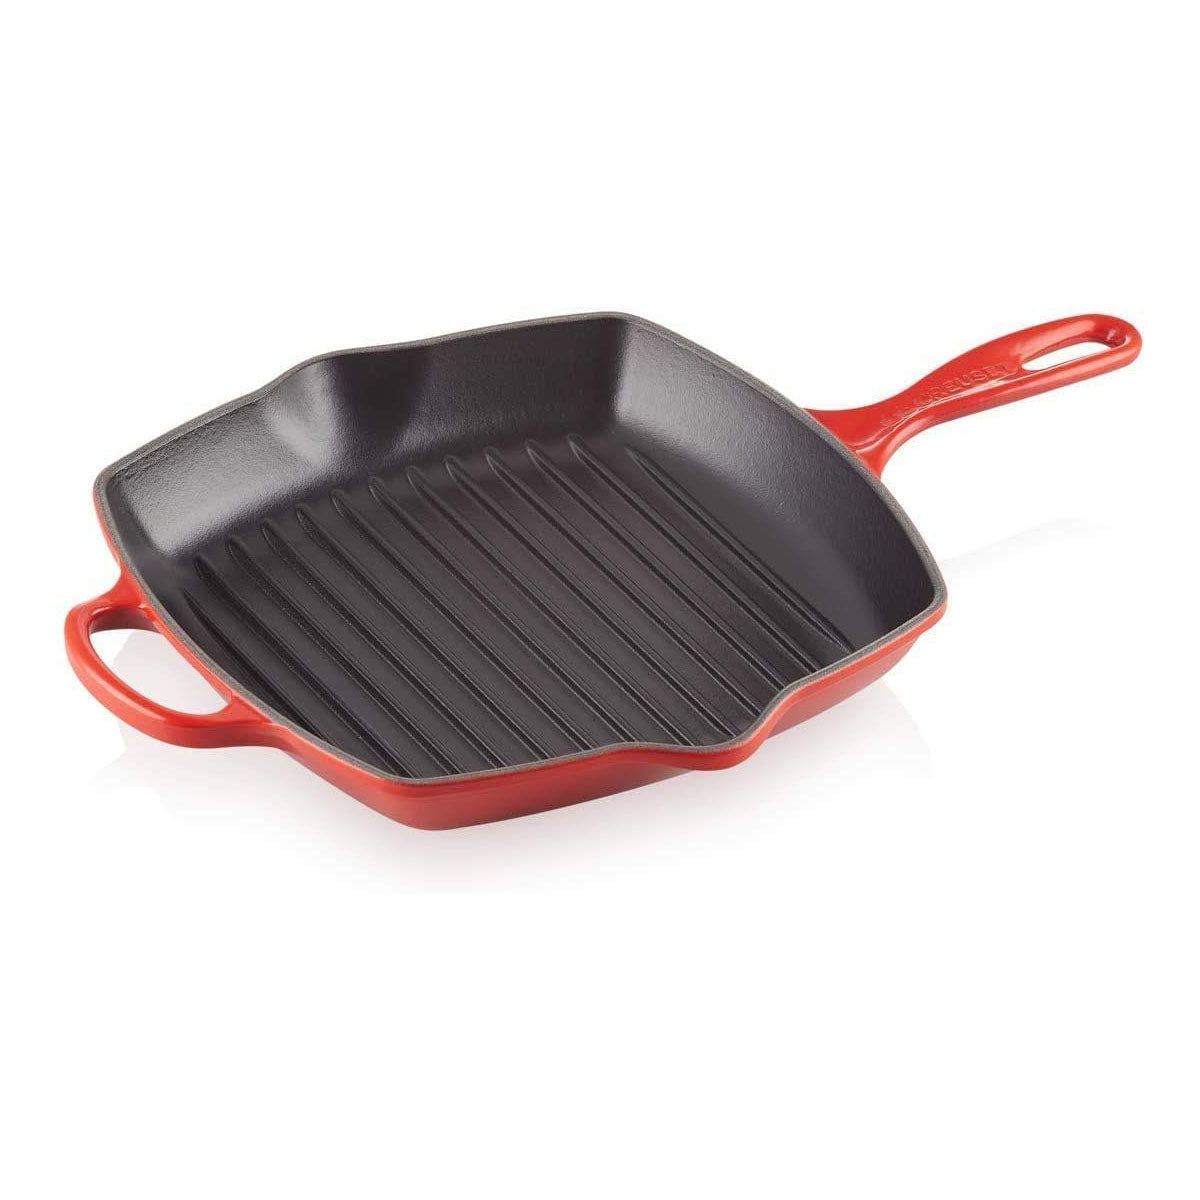 Le Creuset Signature Square Skillet Grill in Oyster